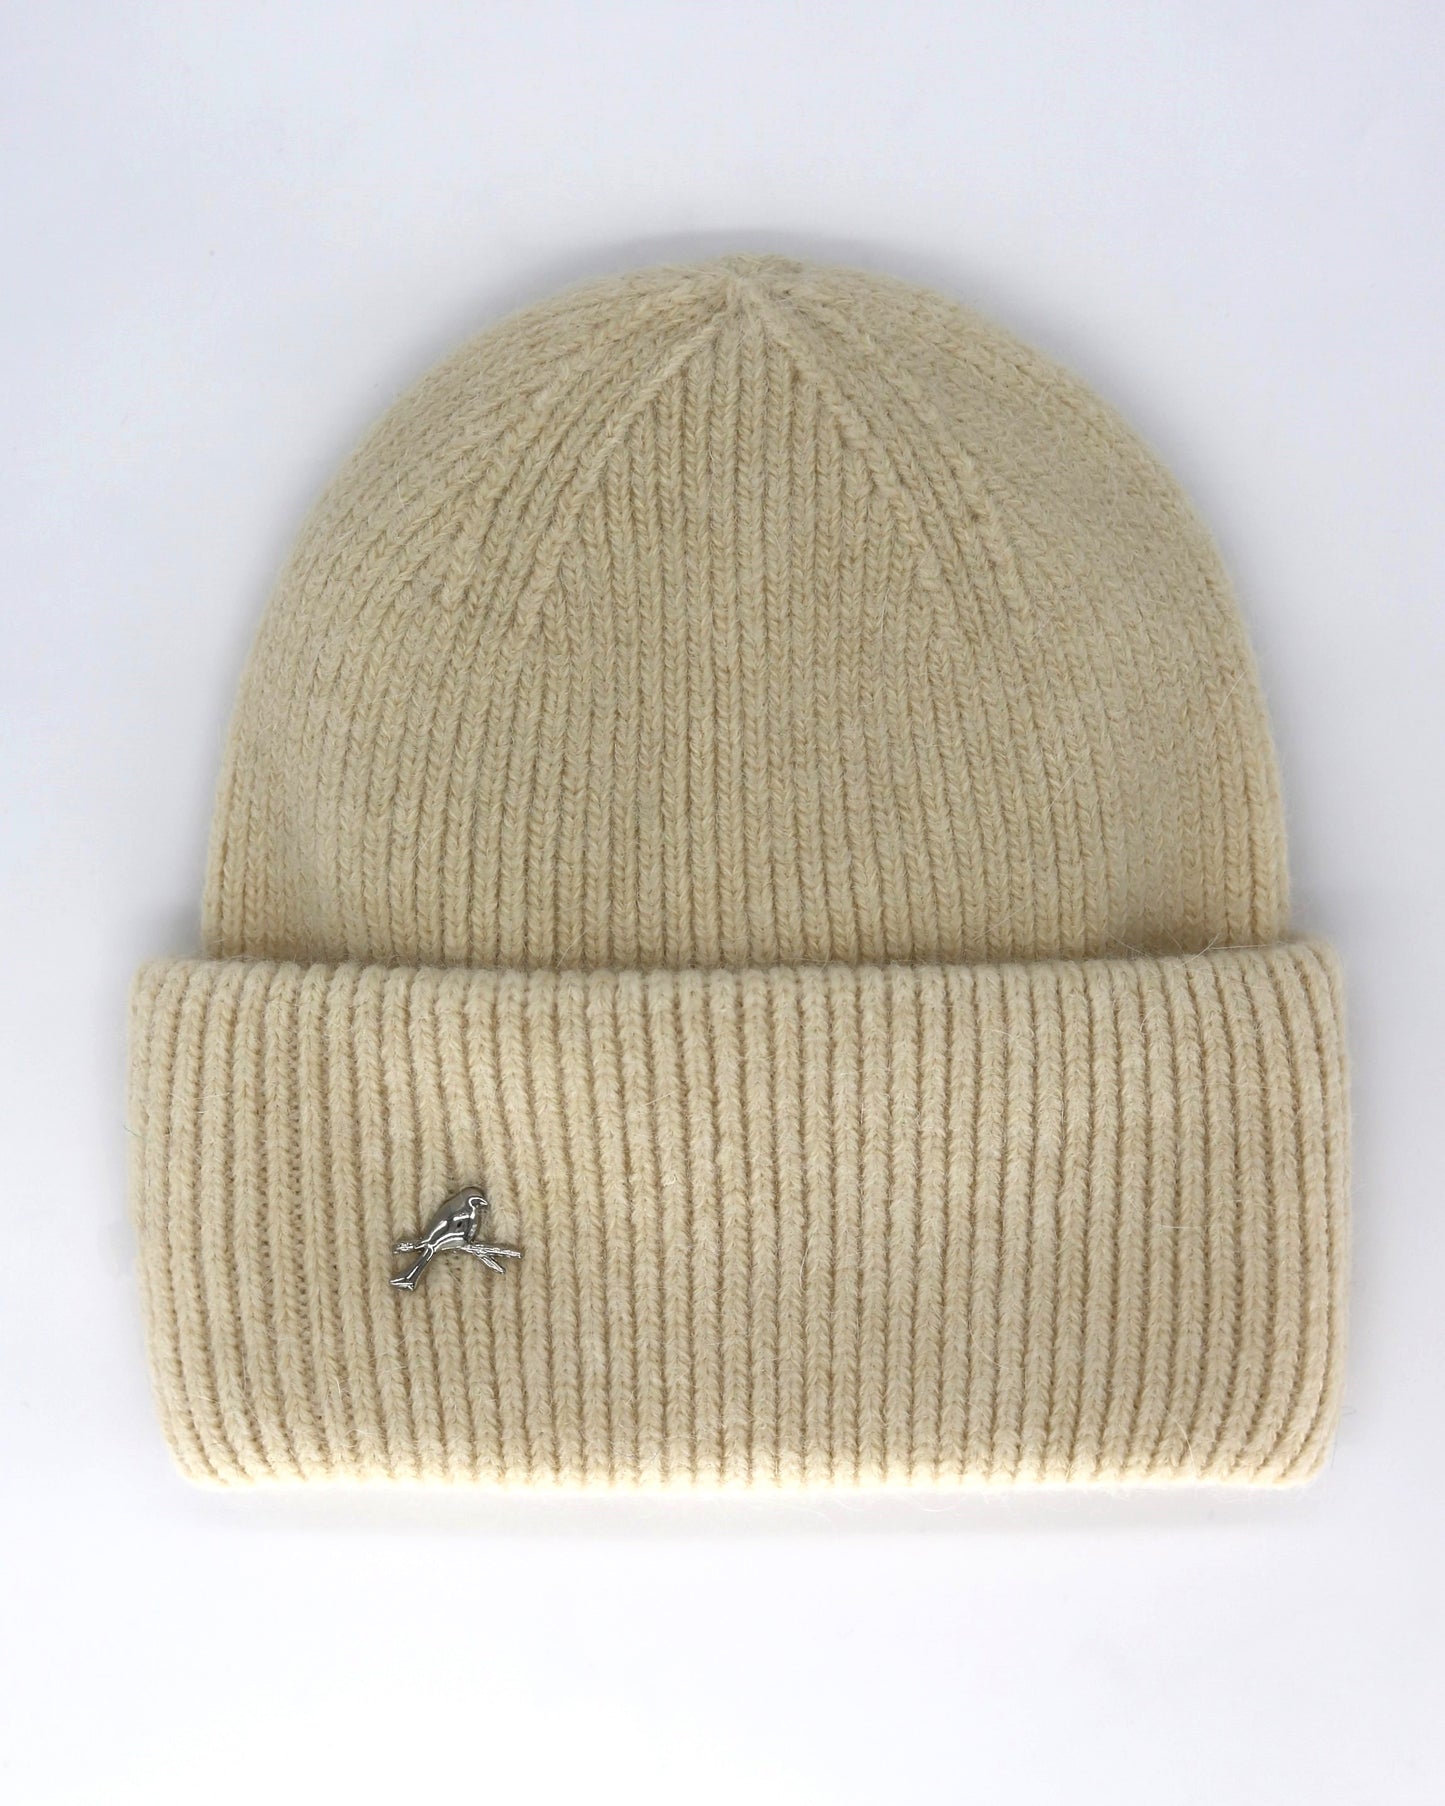 This Hat is a finest hat with a classic silhouette from Villanelle. A luxurious accessory for women made from the softest natural angora and sheep wool for extreme comfort and warmth. It is made in a trendy cream color accompanied by an elegant pin. This product is sourced and manufactured in Poland.